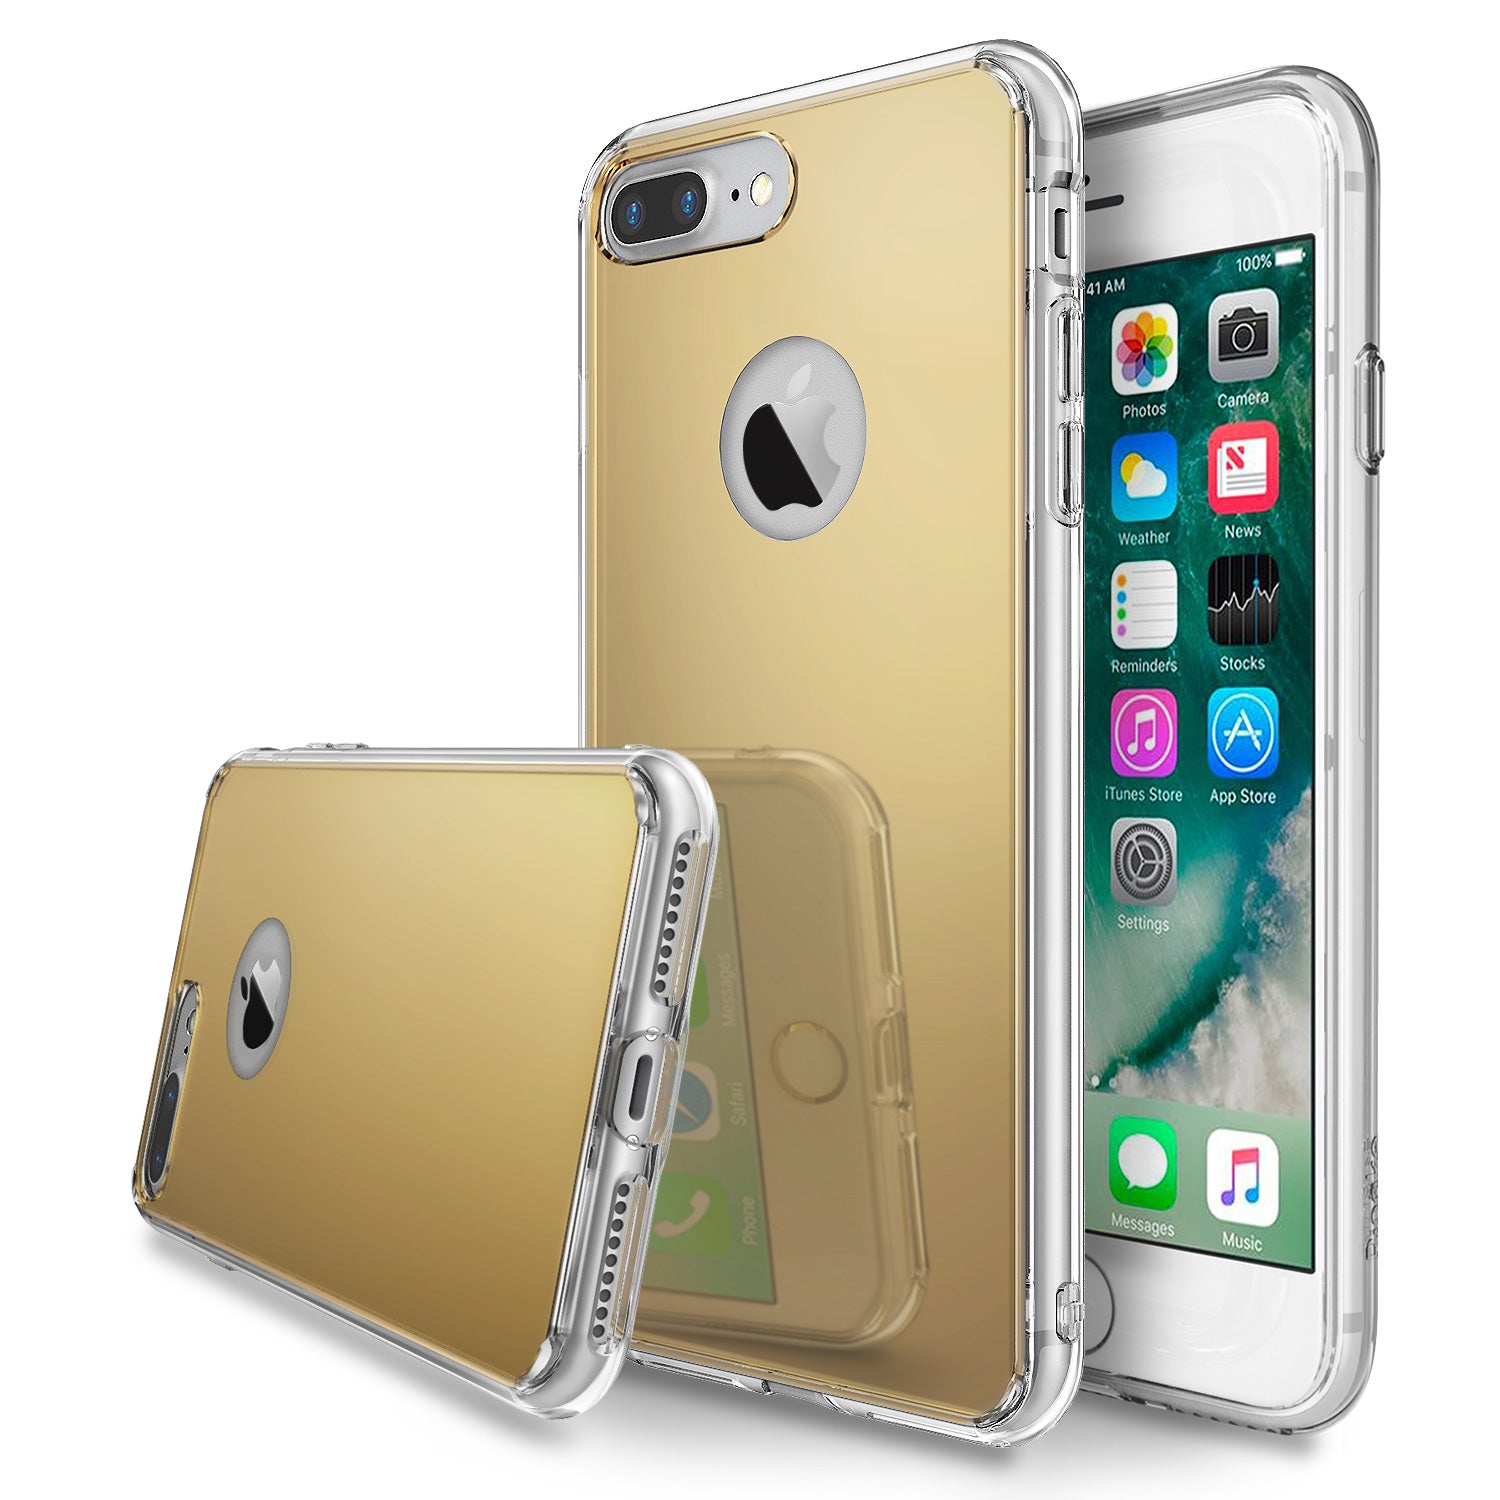 ringke mirror back case cover for iphone 7 plus 8 plus main royal gold